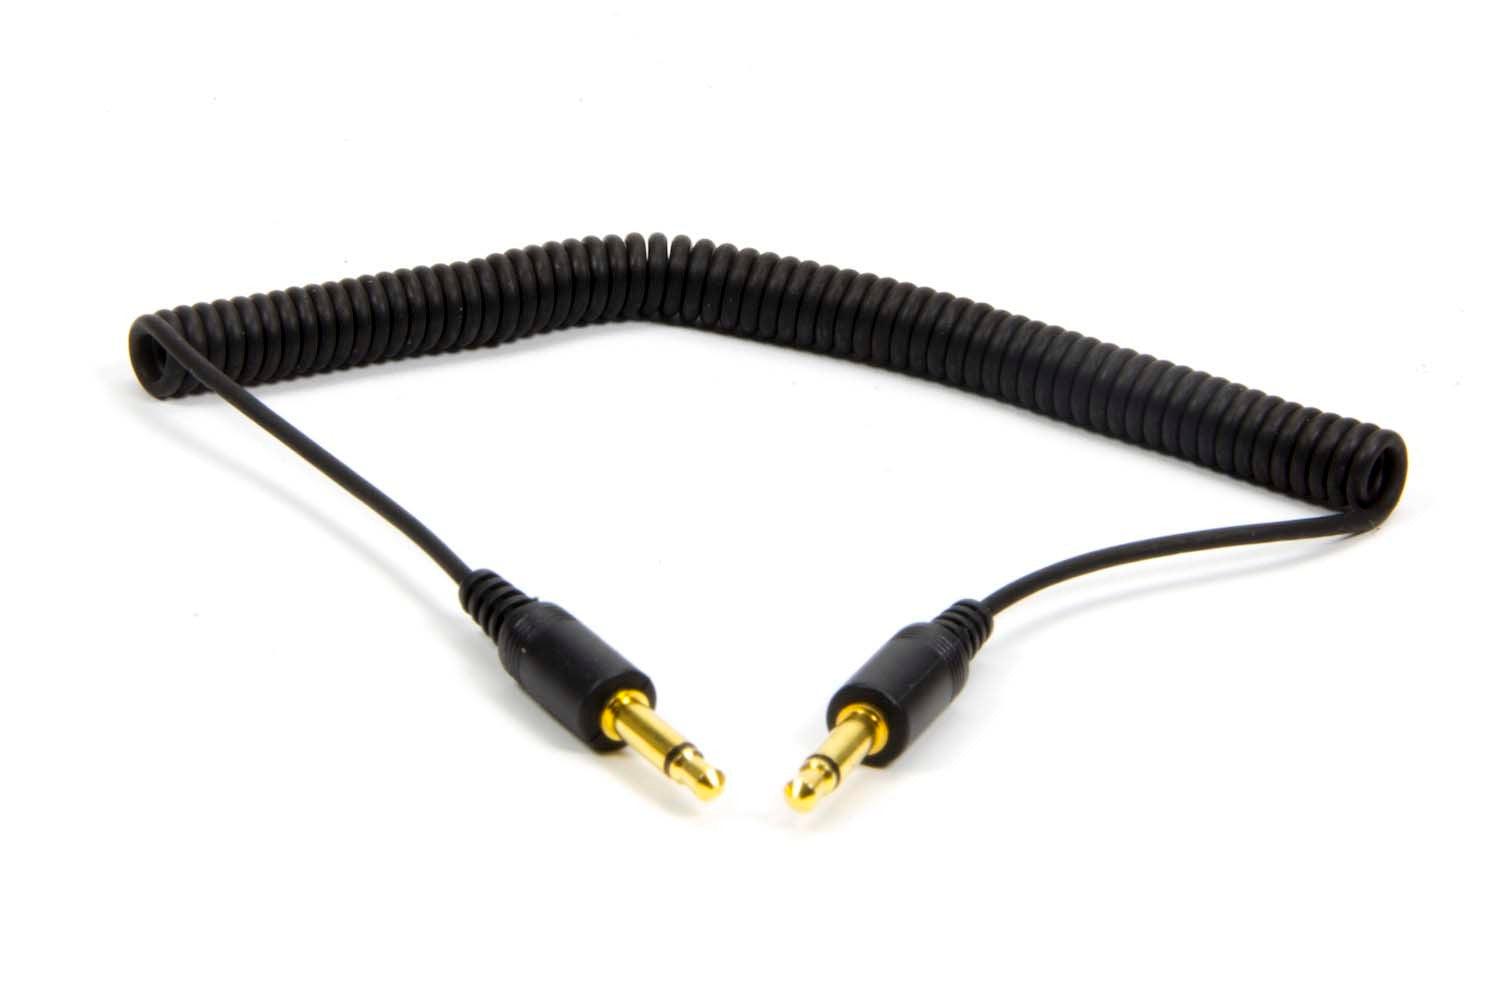 Cord Extra Long for Ace to Radio - Burlile Performance Products